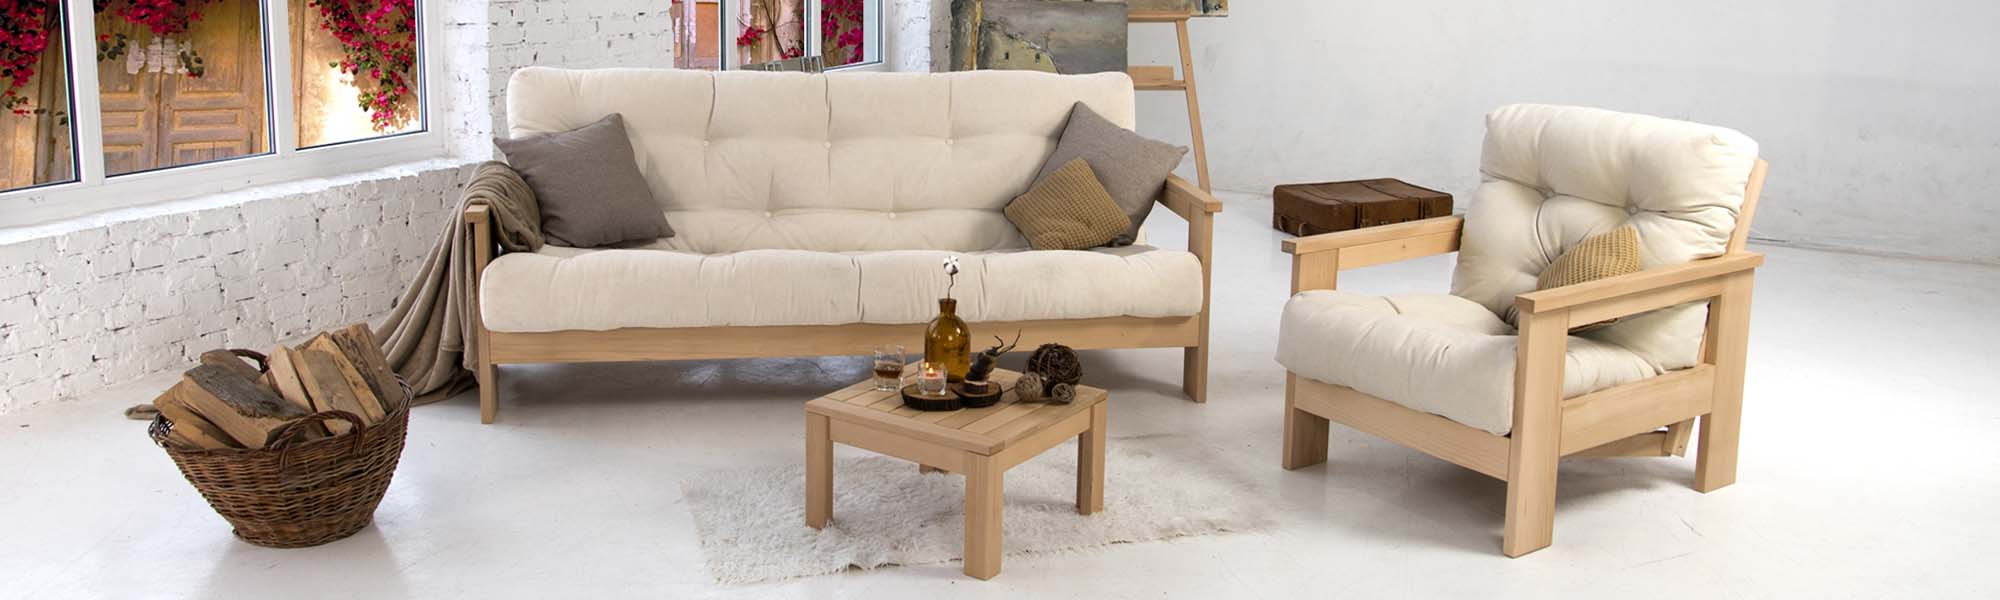 A wooden sofa, an armchair in cream upholstery and a coffee table in a spacious living room